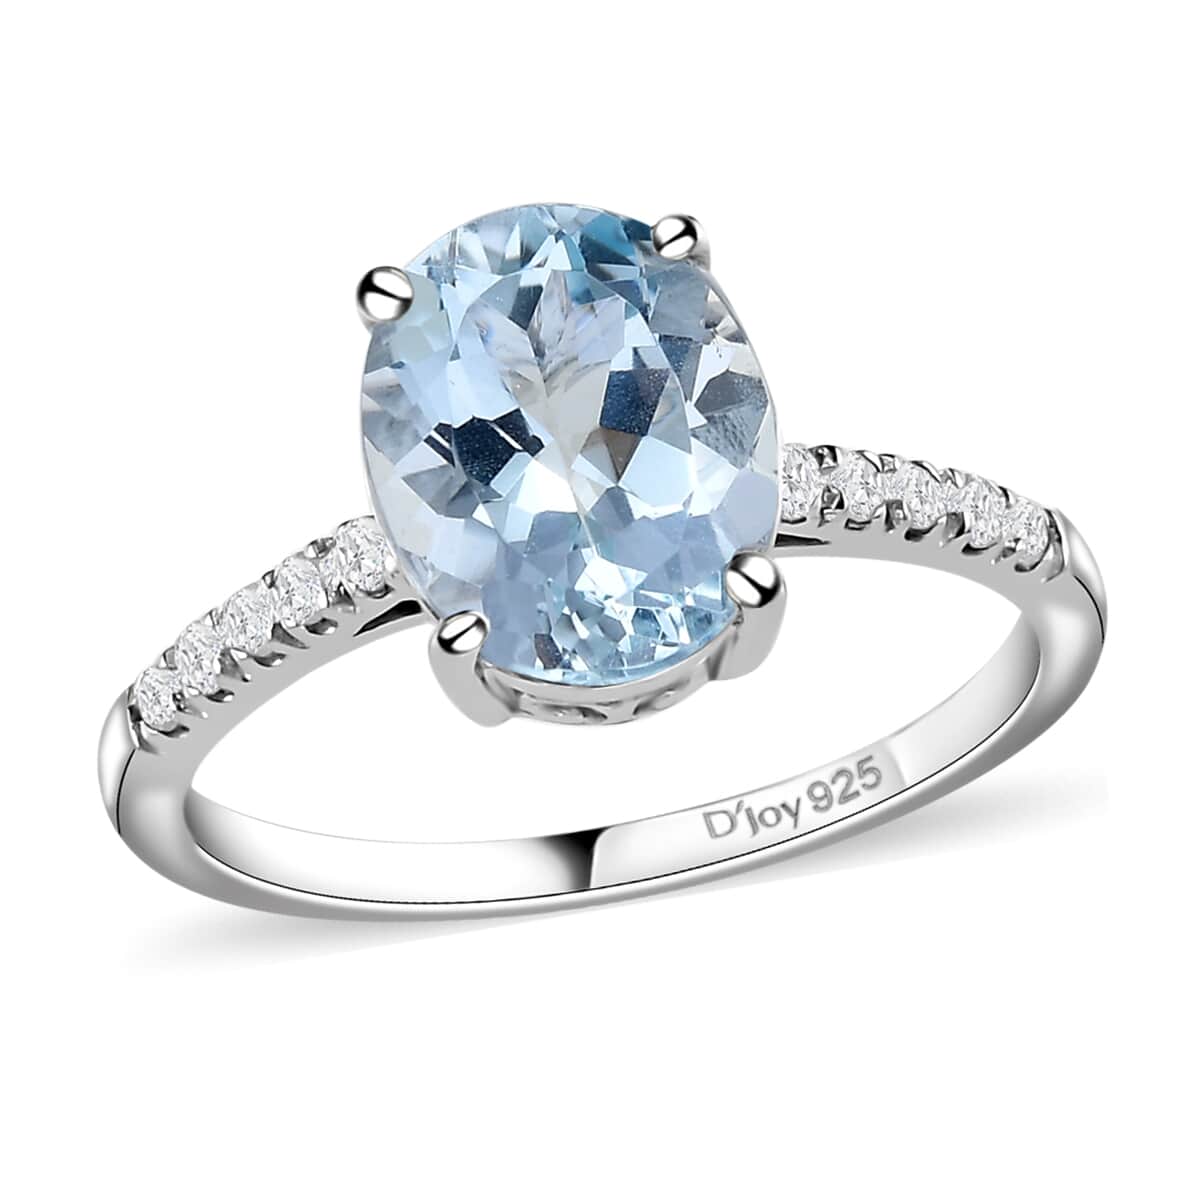 Premium Mangoro Aquamarine, Diamond Ring in Platinum Over Sterling Silver,Promise Rings For Her,Silver Fancy Ring 2.35 ctw (Size 10.0) image number 0